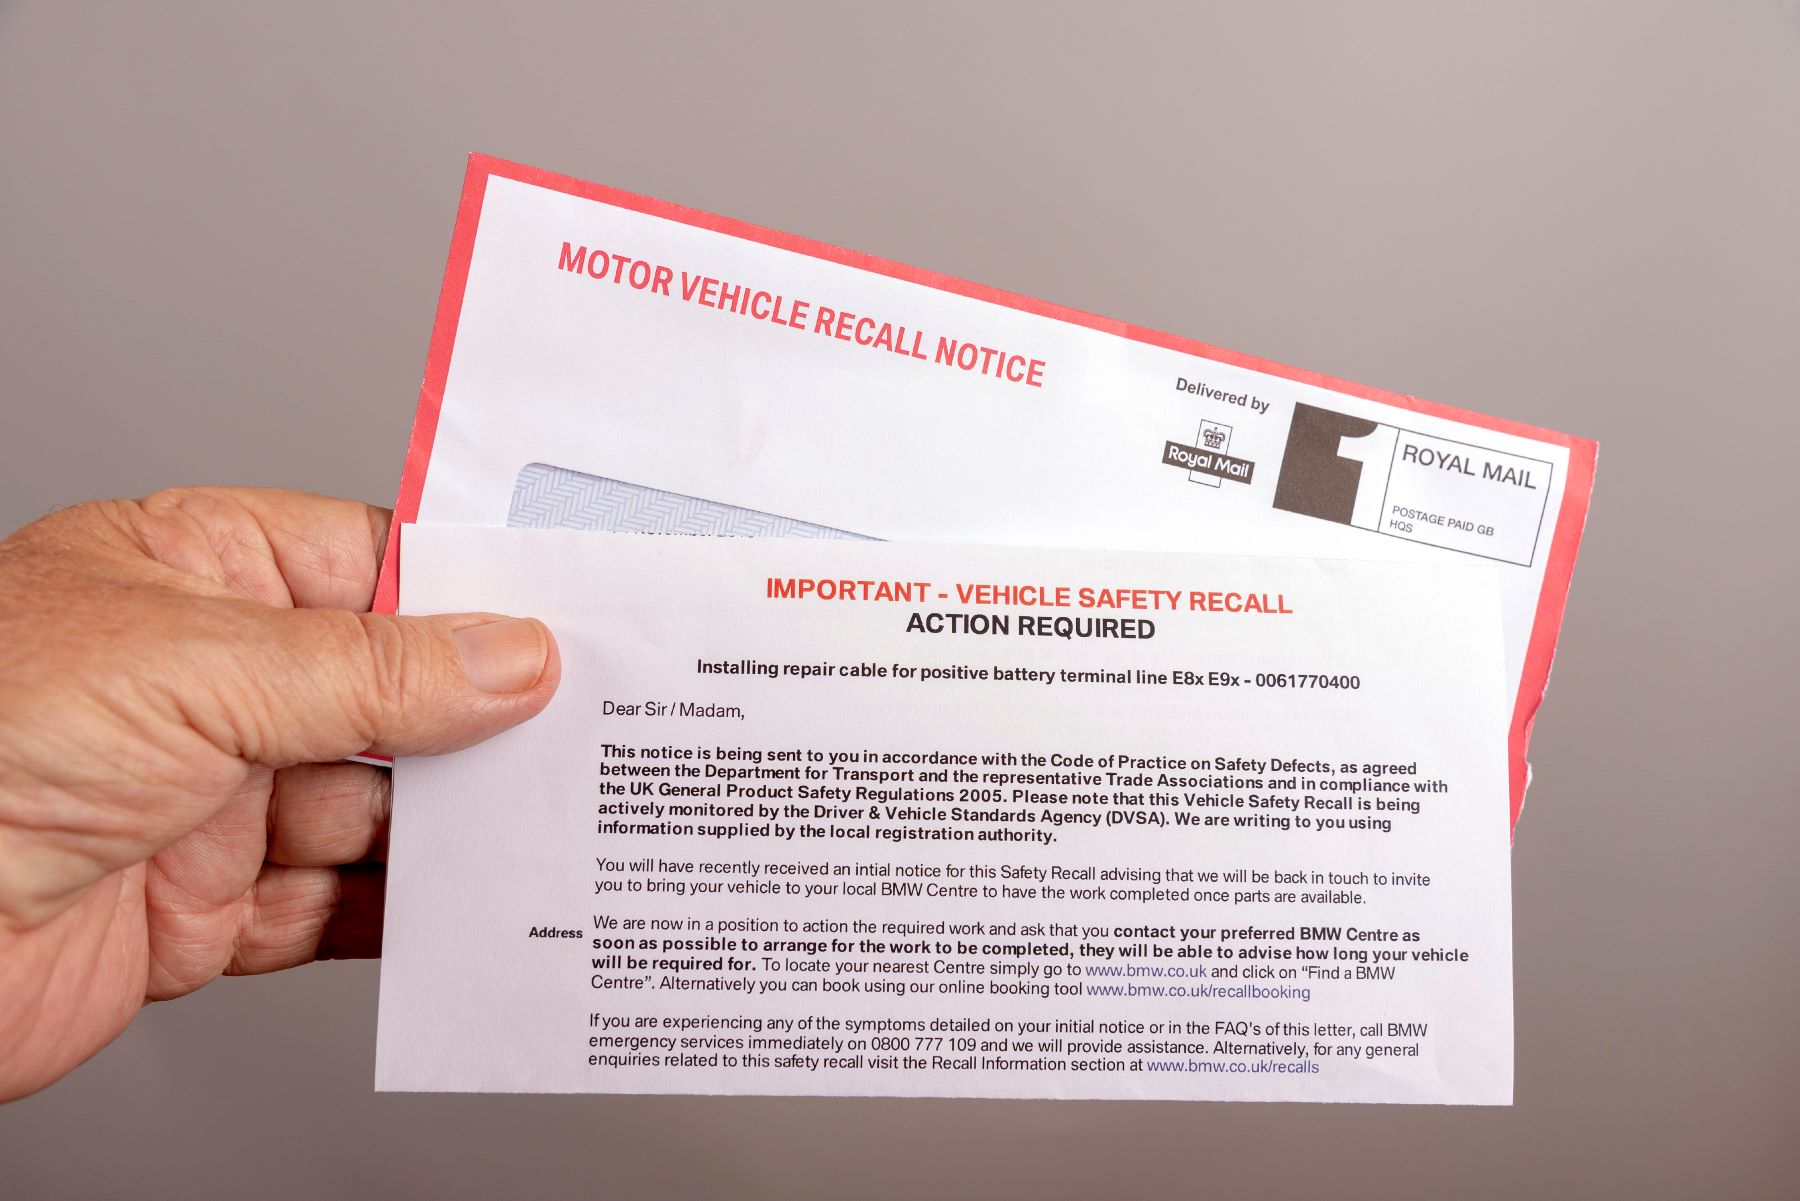 A car safety recall notice letter delivered by mail in the U.K.